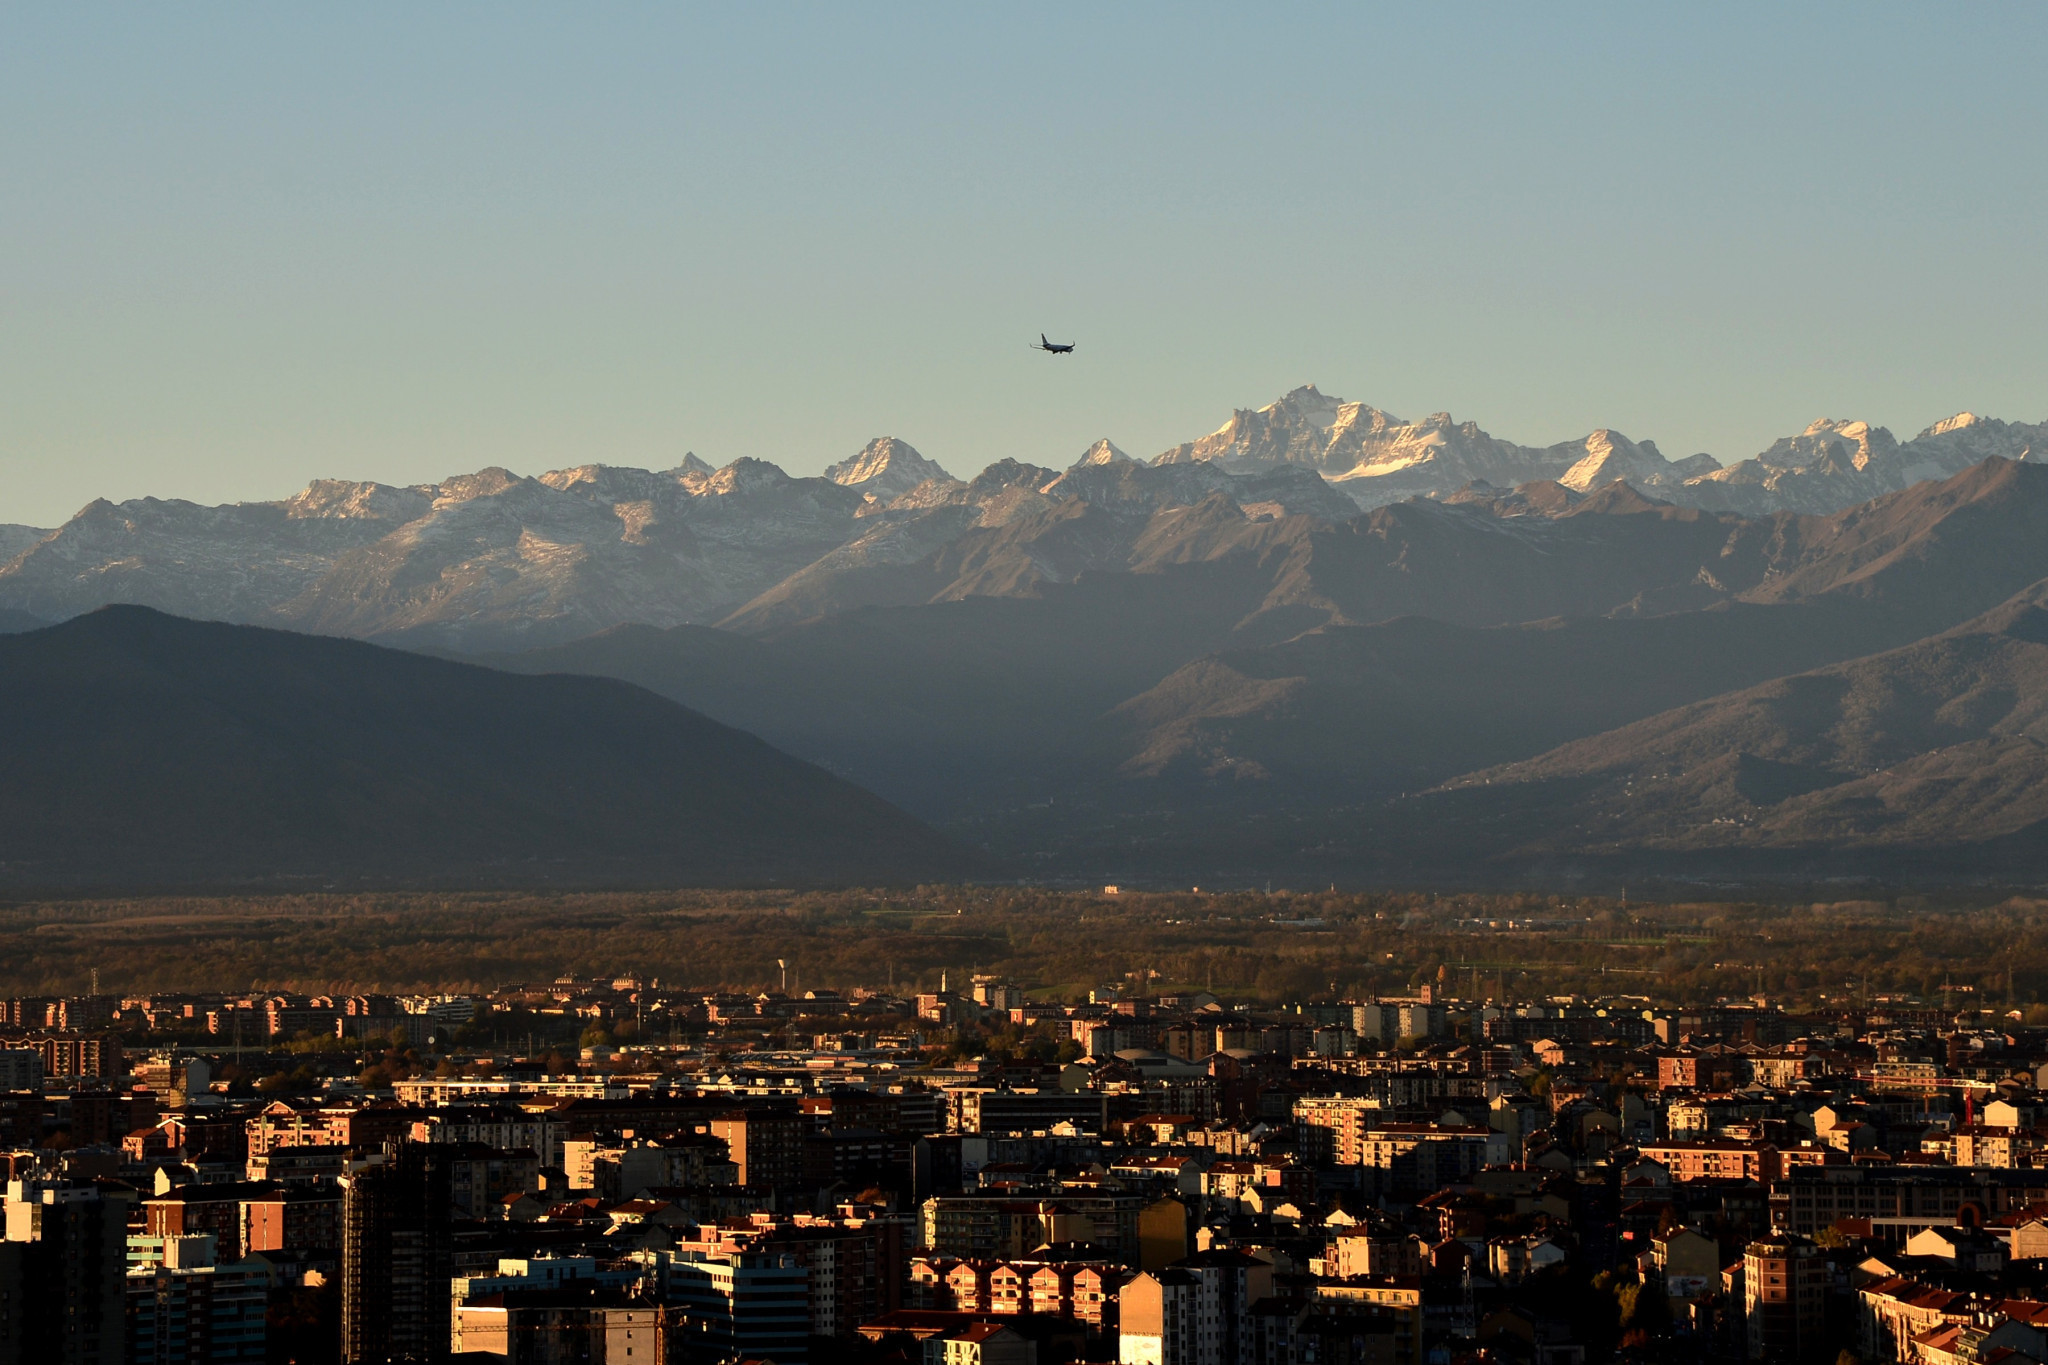 Turin also hosted the 2006 Winter Olympic and Paralympic Games ©Getty Images